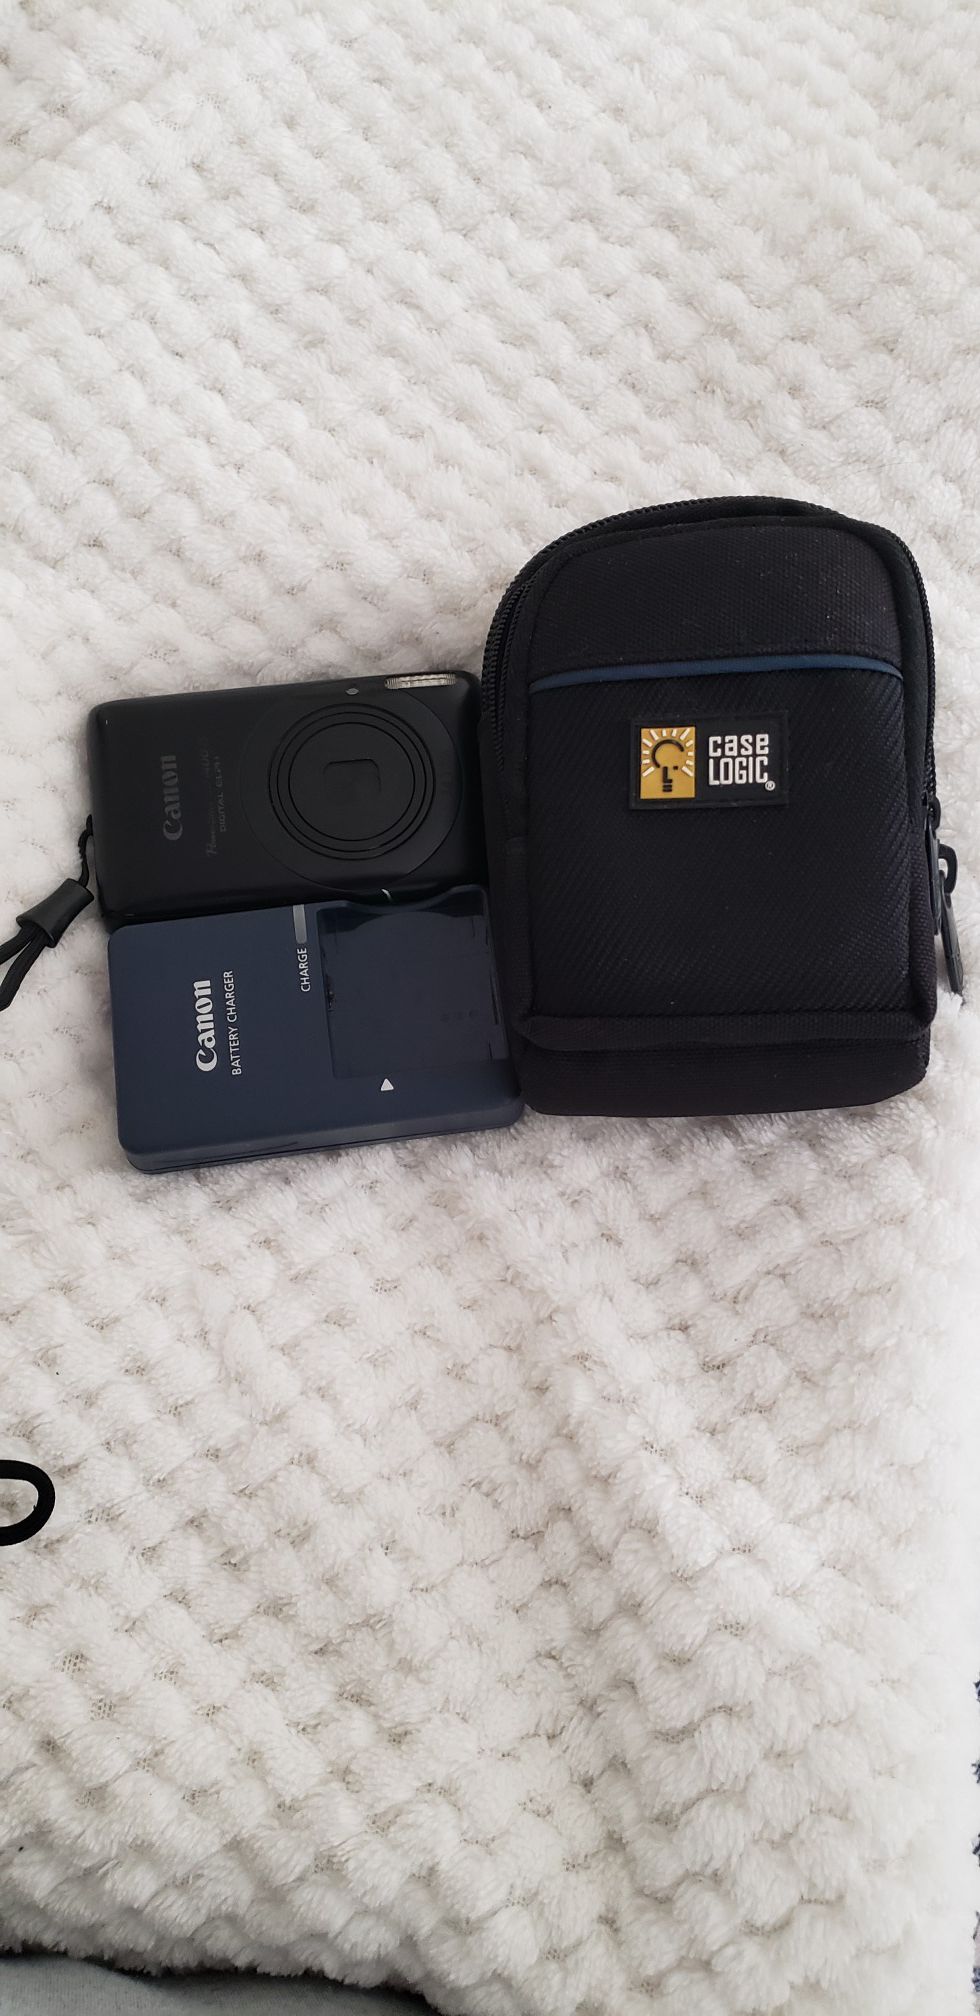 Canon digital camera charger and case